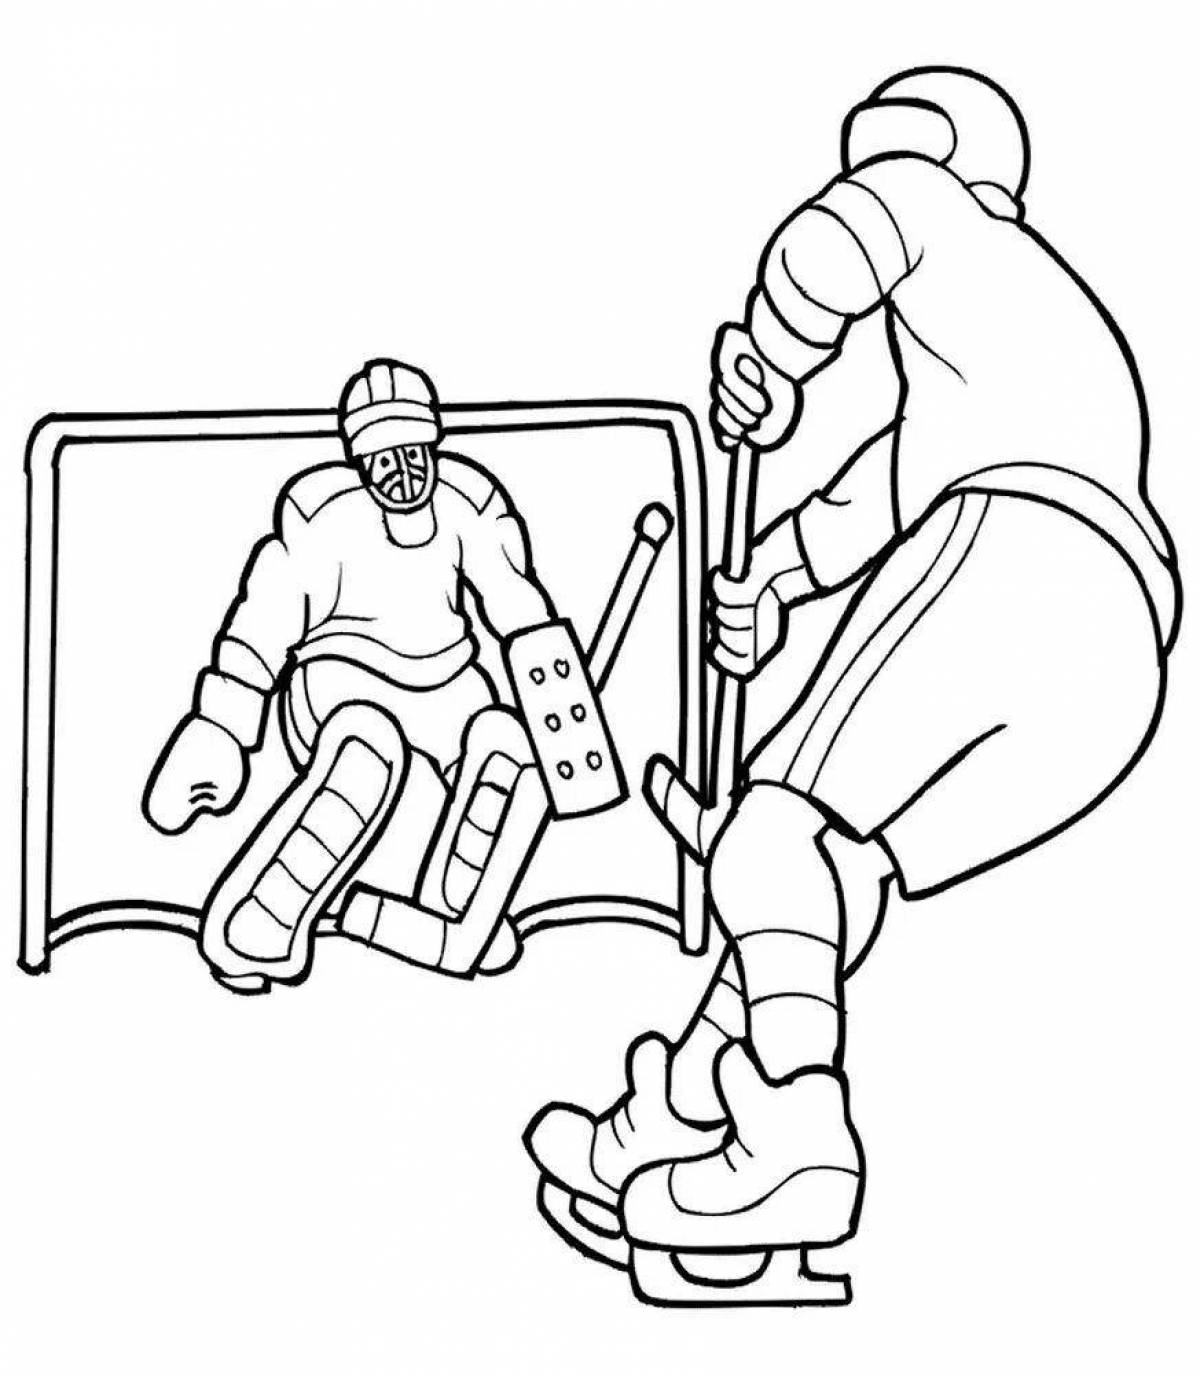 Great hockey coloring book